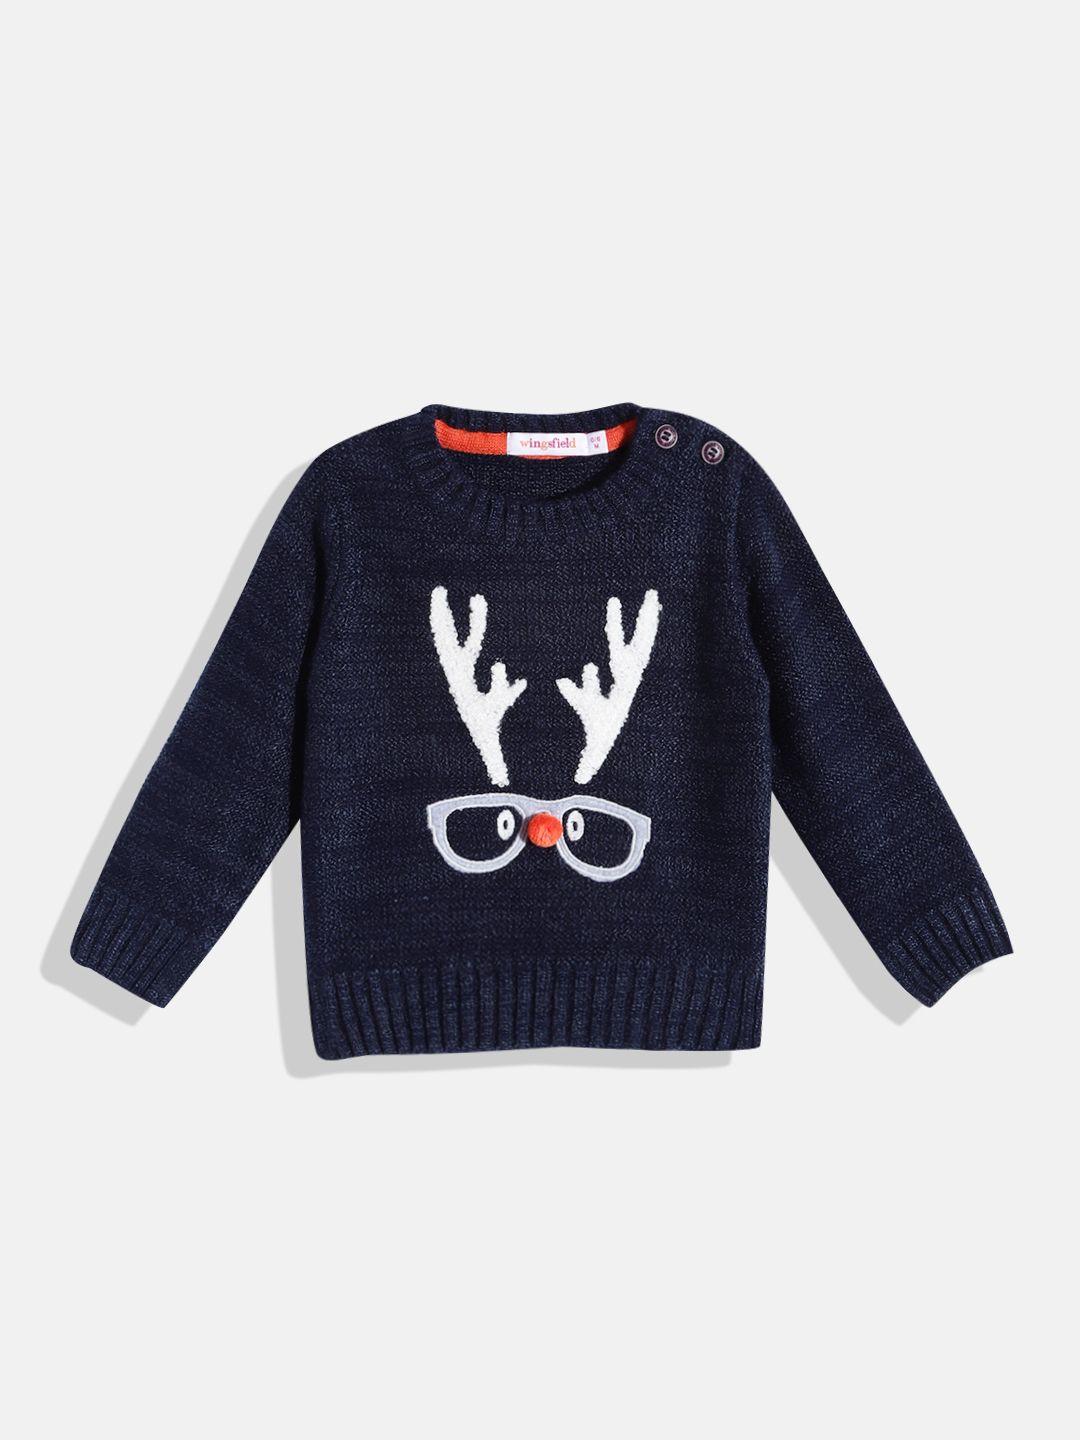 wingsfield boys navy blue & white graphic printed pullover